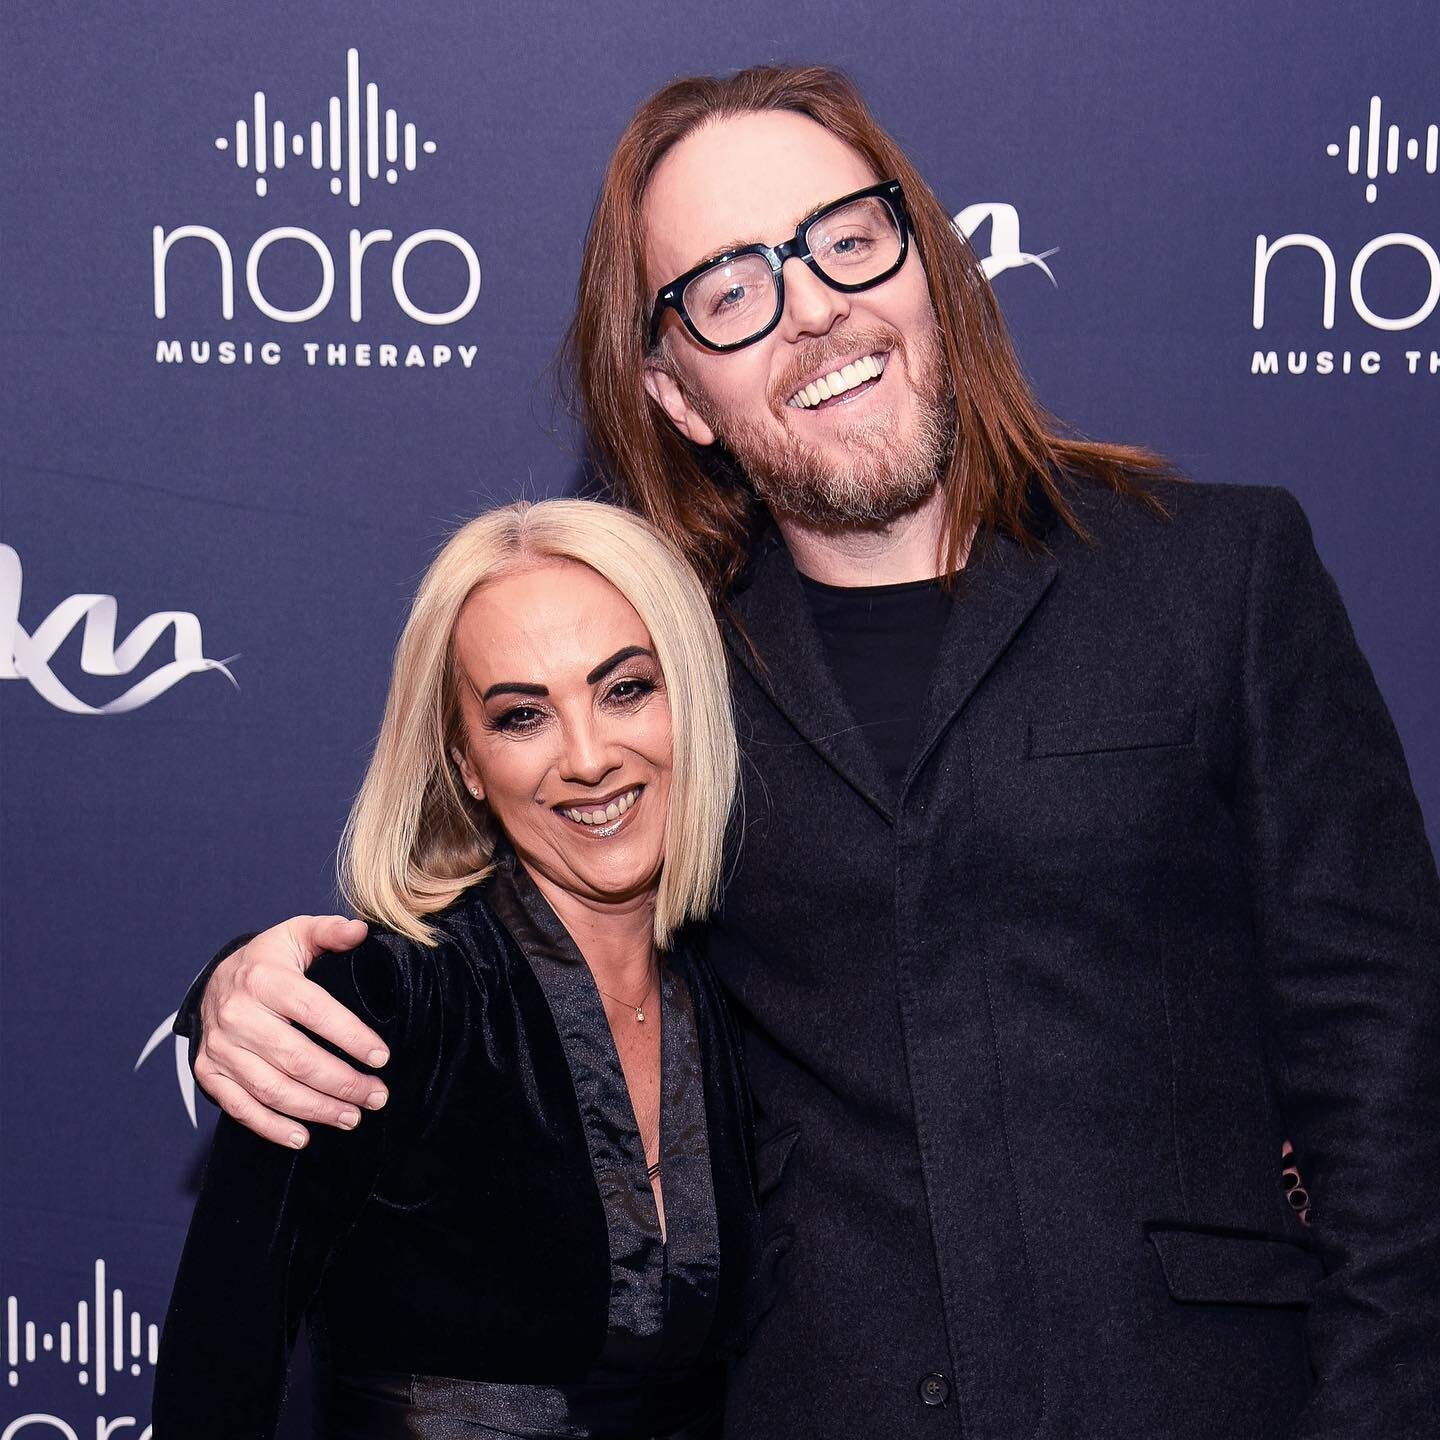 Noro Music Therapy&rsquo;s major fundraiser 'Art of Music' presented by Jenny Morris, was held recently at the Art Gallery of NSW. 'Art of Music' takes Australia&rsquo;s music royalty, pairs them up with some of Australia&rsquo;s greatest living arti